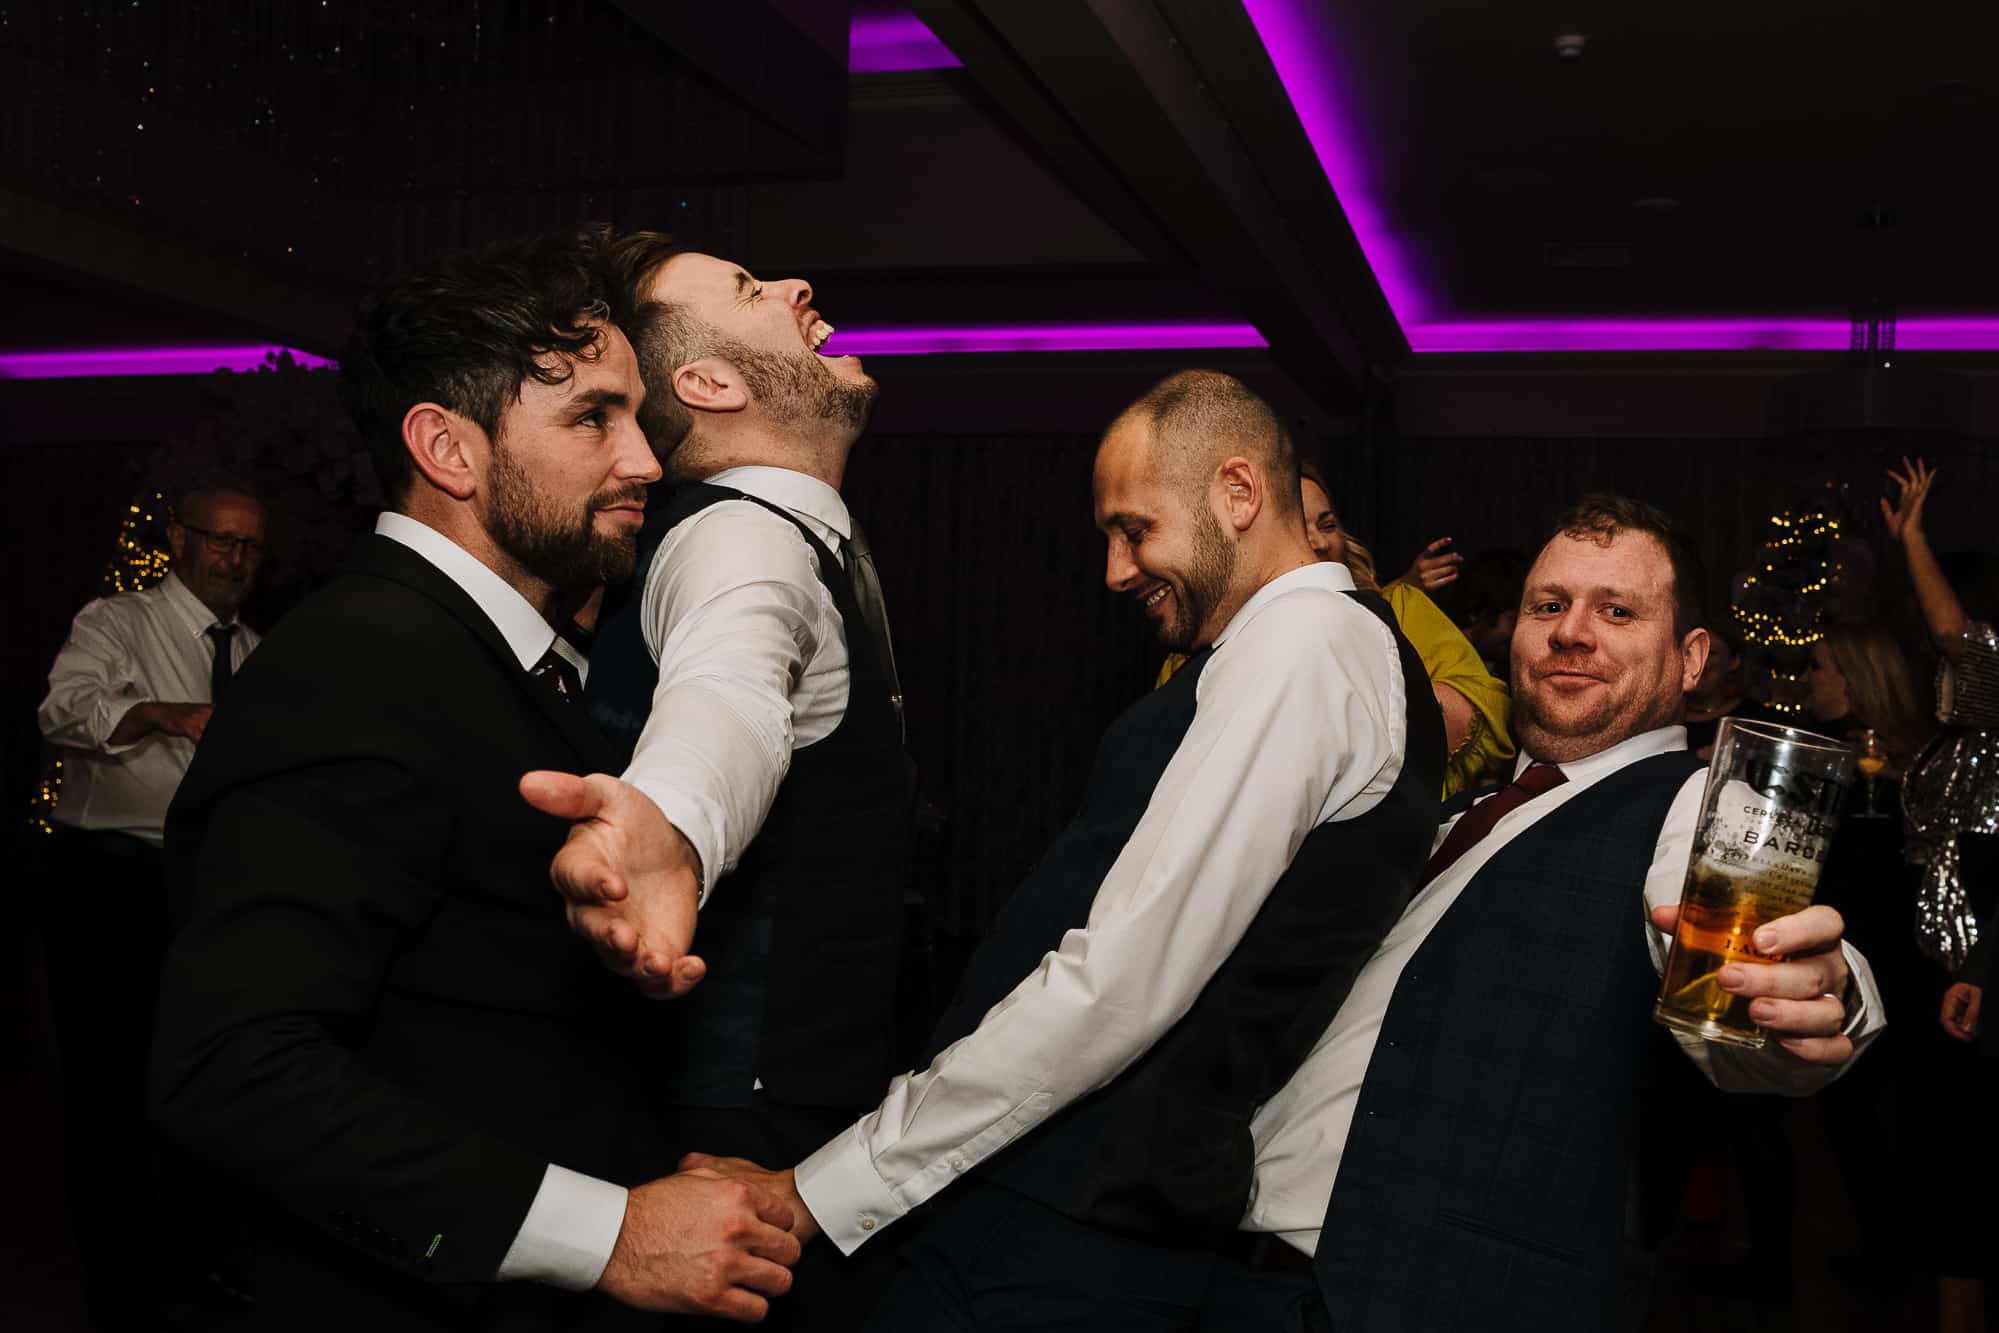 Groom and his friends dancing